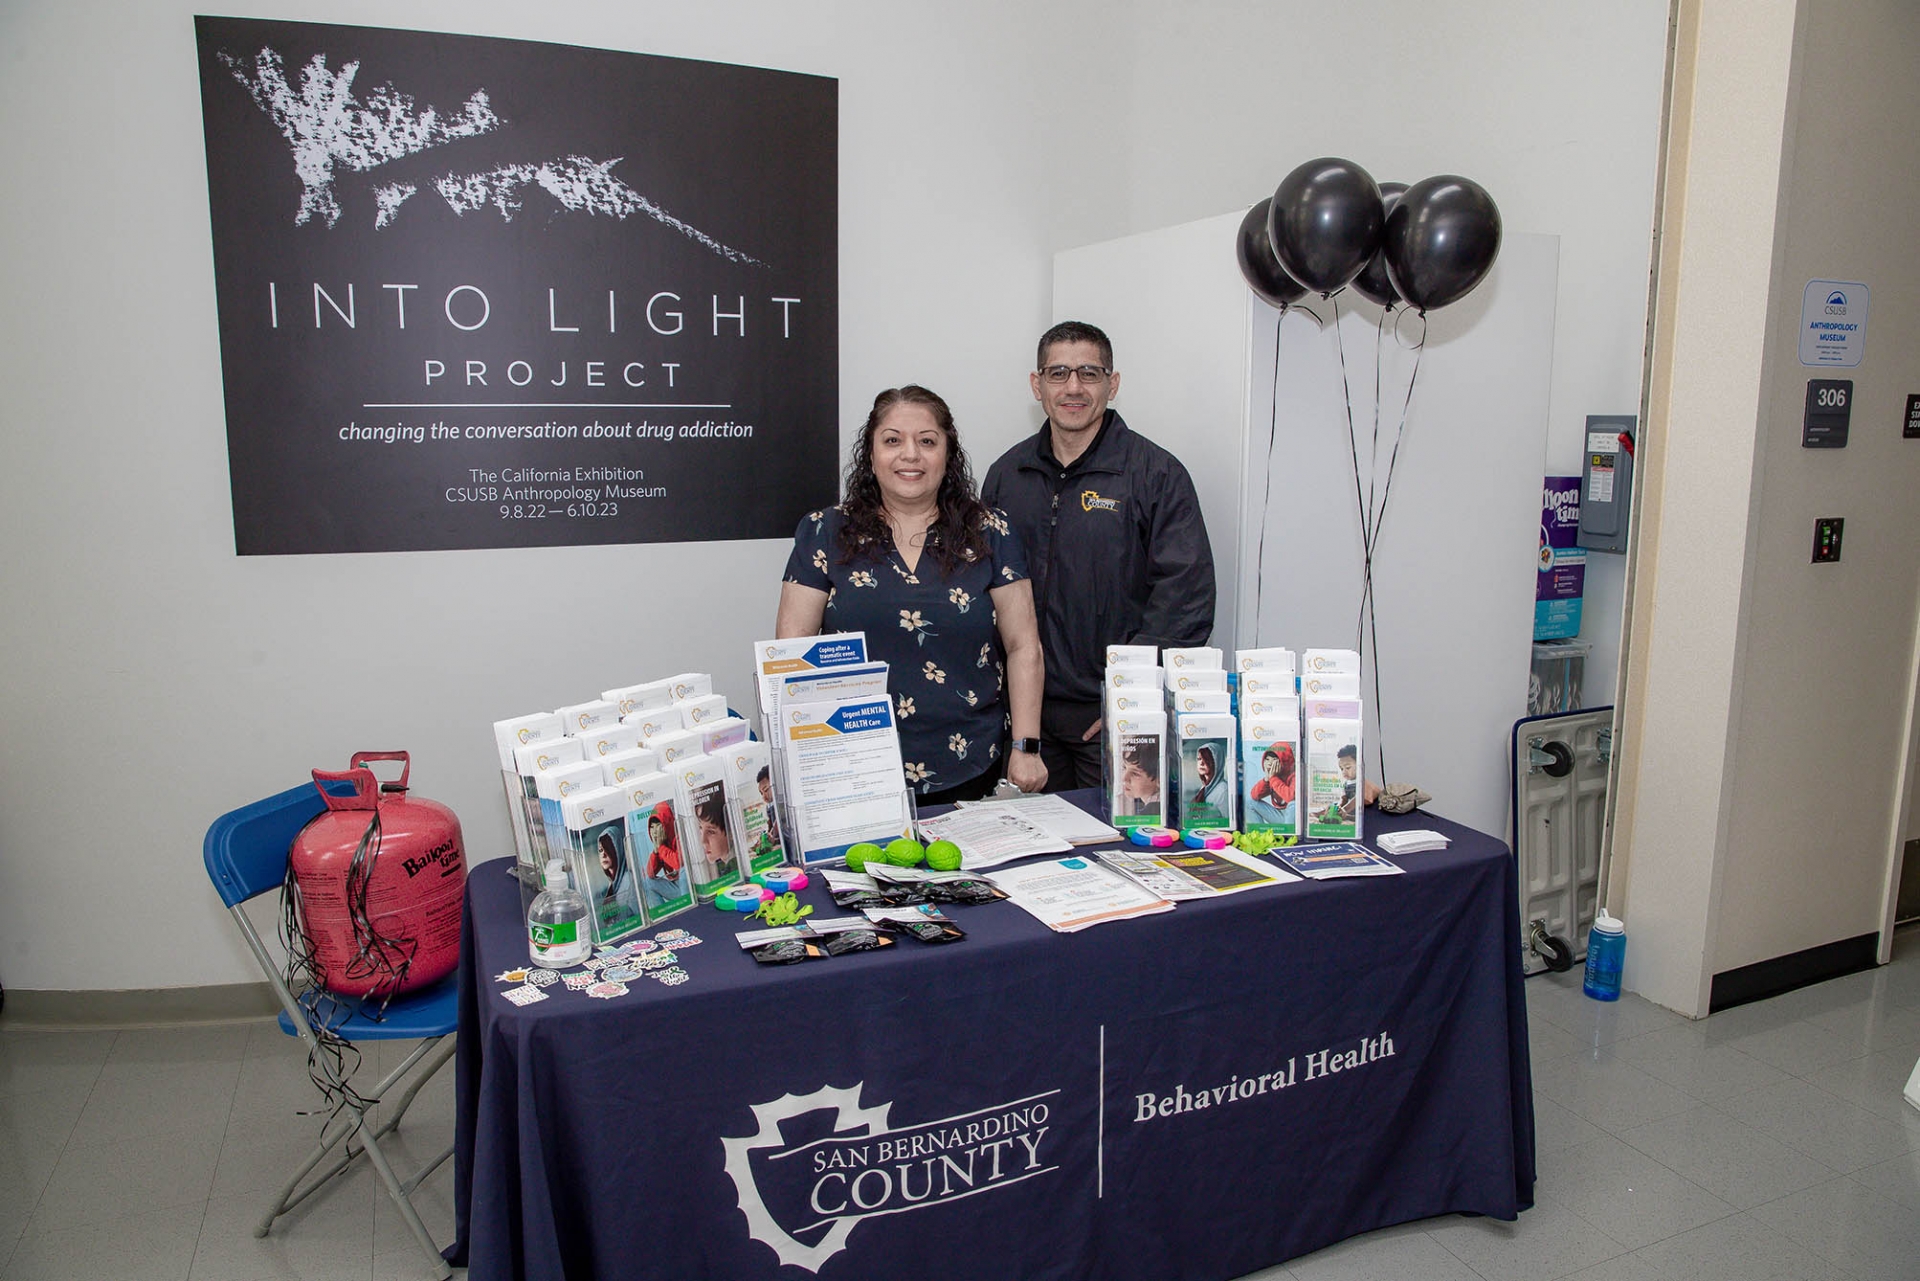 San Bernardino County Social Services staff members Monica Rosas (left) and Daniel Mendez met with students, staff and faculty in CSUSB’s Anthropology Museum during Black Balloon Day, an event during the spring semester that brought awareness to the dangers of drug overdoses and substance use disorder.